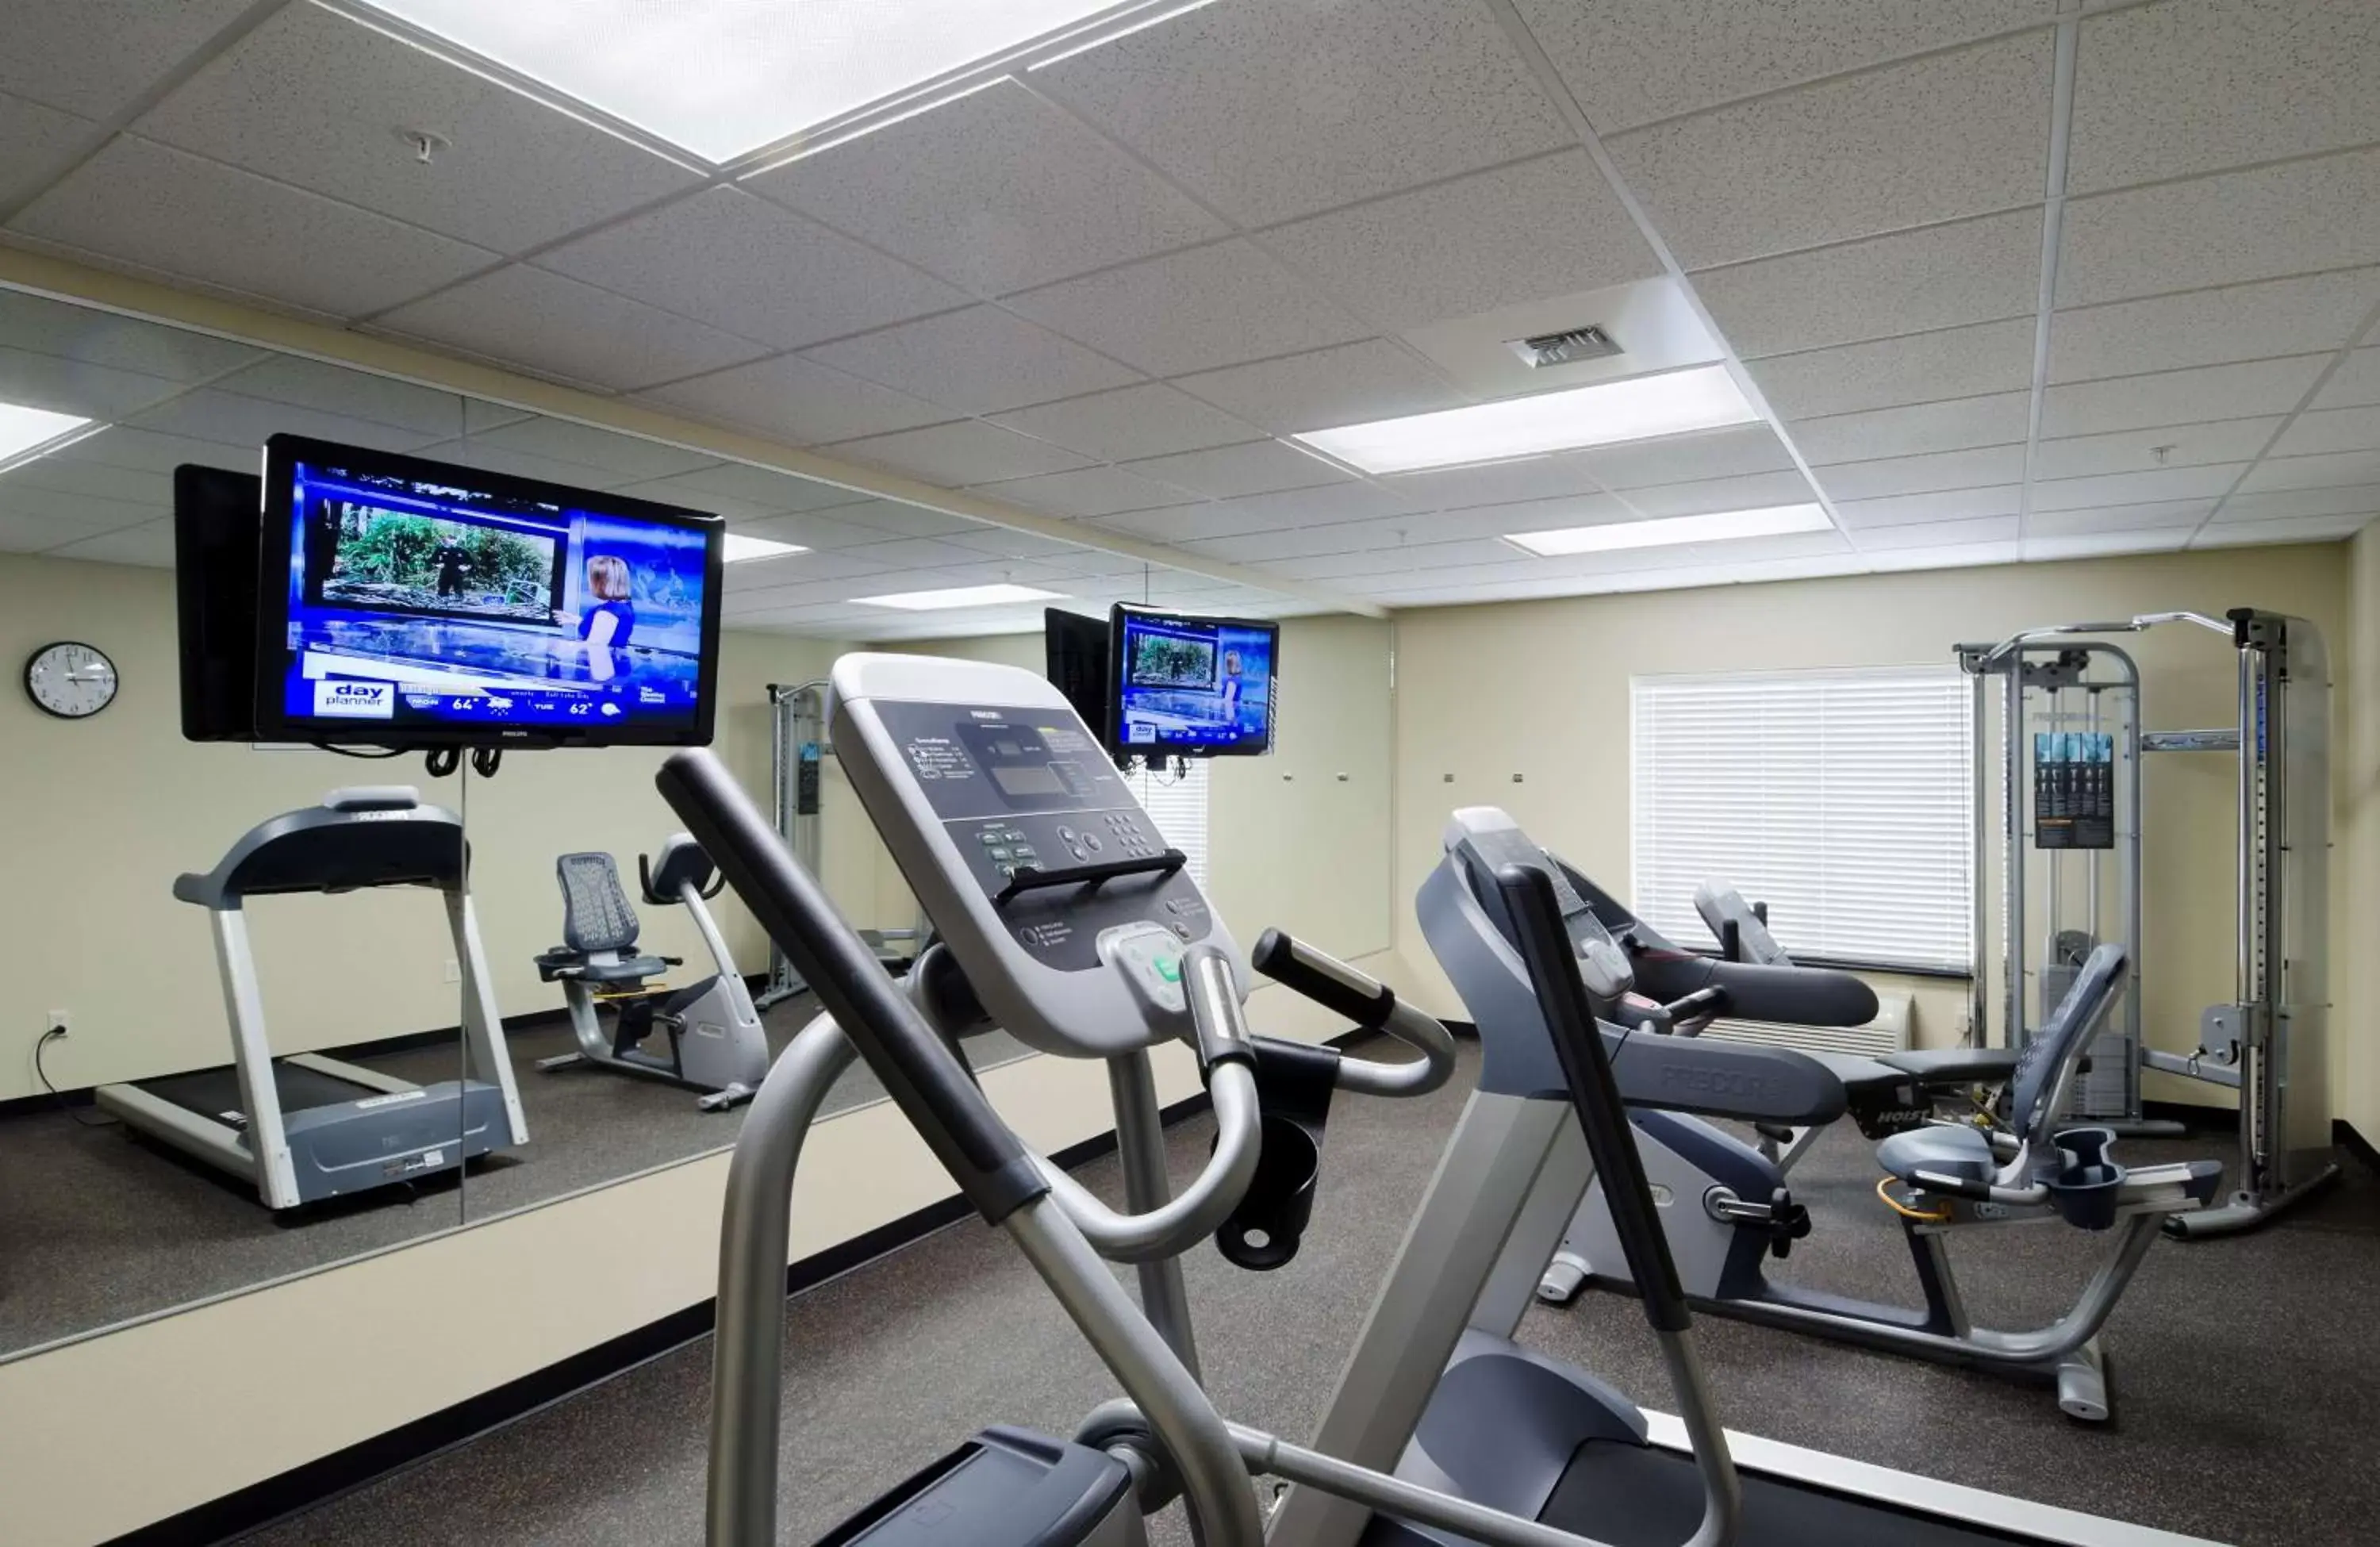 Fitness centre/facilities, Fitness Center/Facilities in Best Western Shelby Inn & Suites